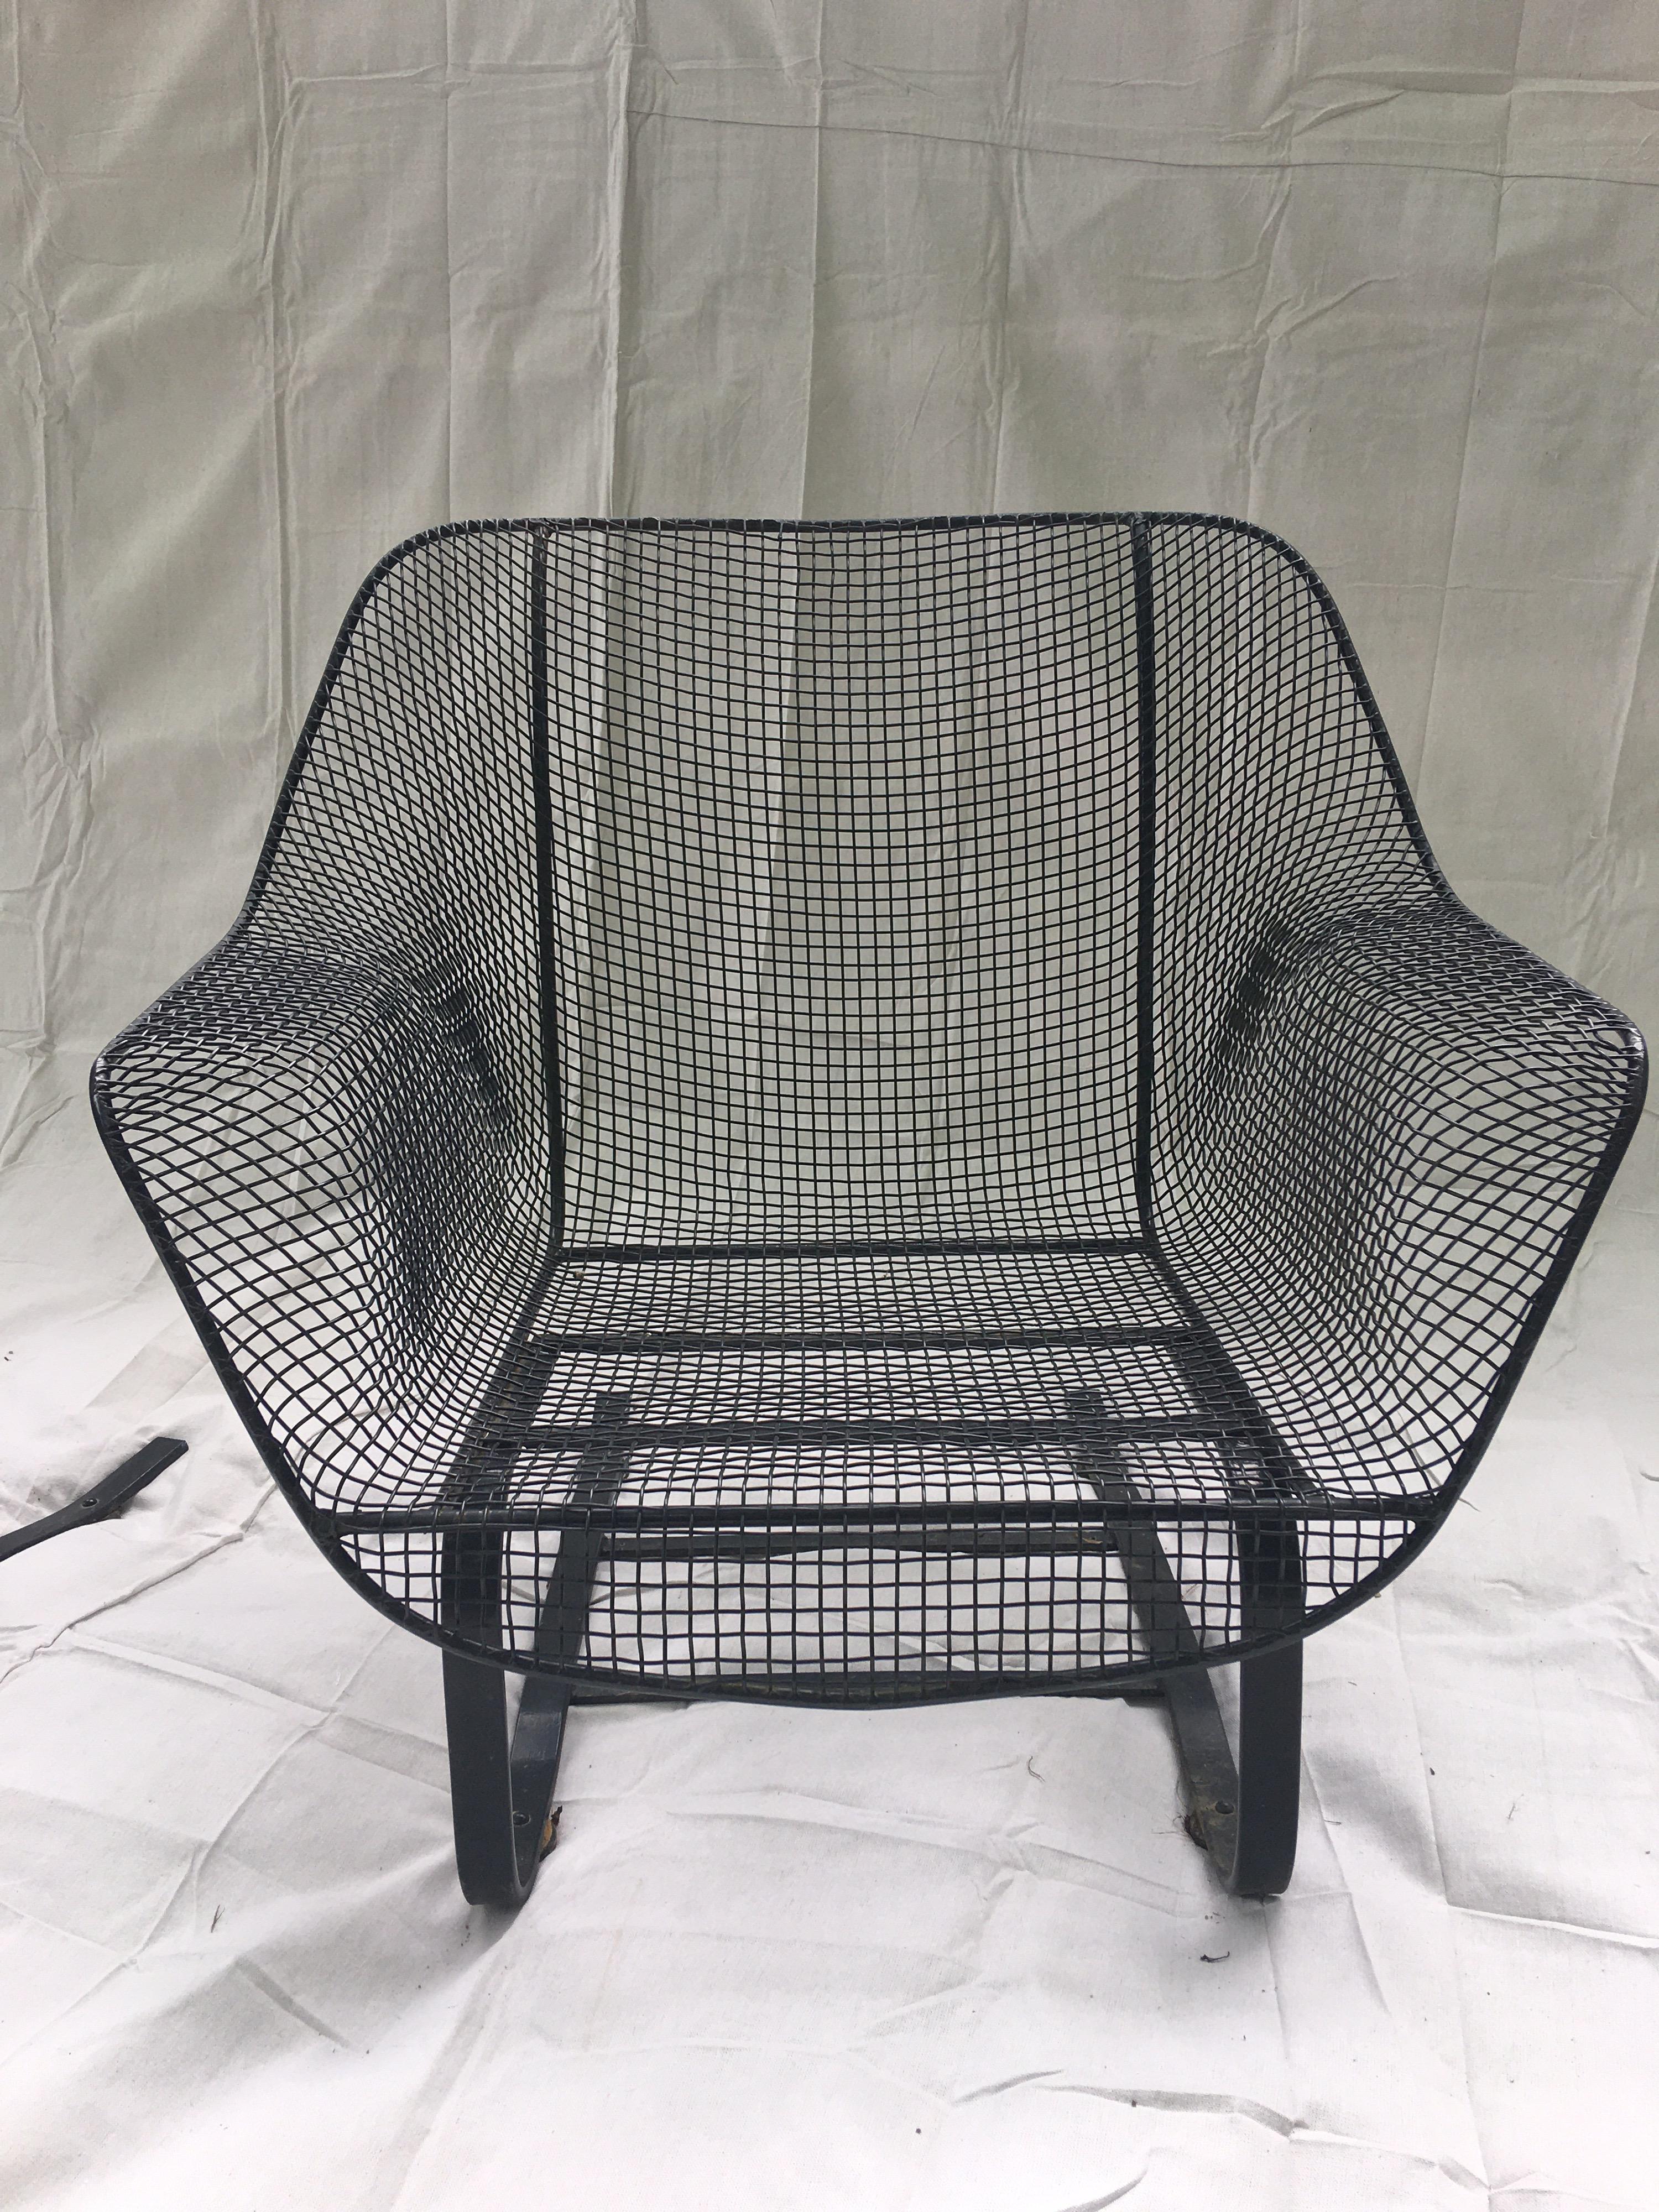 Pair of Russell Woodard Springer lounge chairs, newly powder-coated black, check availability we often have pieces that you can select colors! Classic midcentury iron furniture that fits effortlessly in both modern and traditional environments!